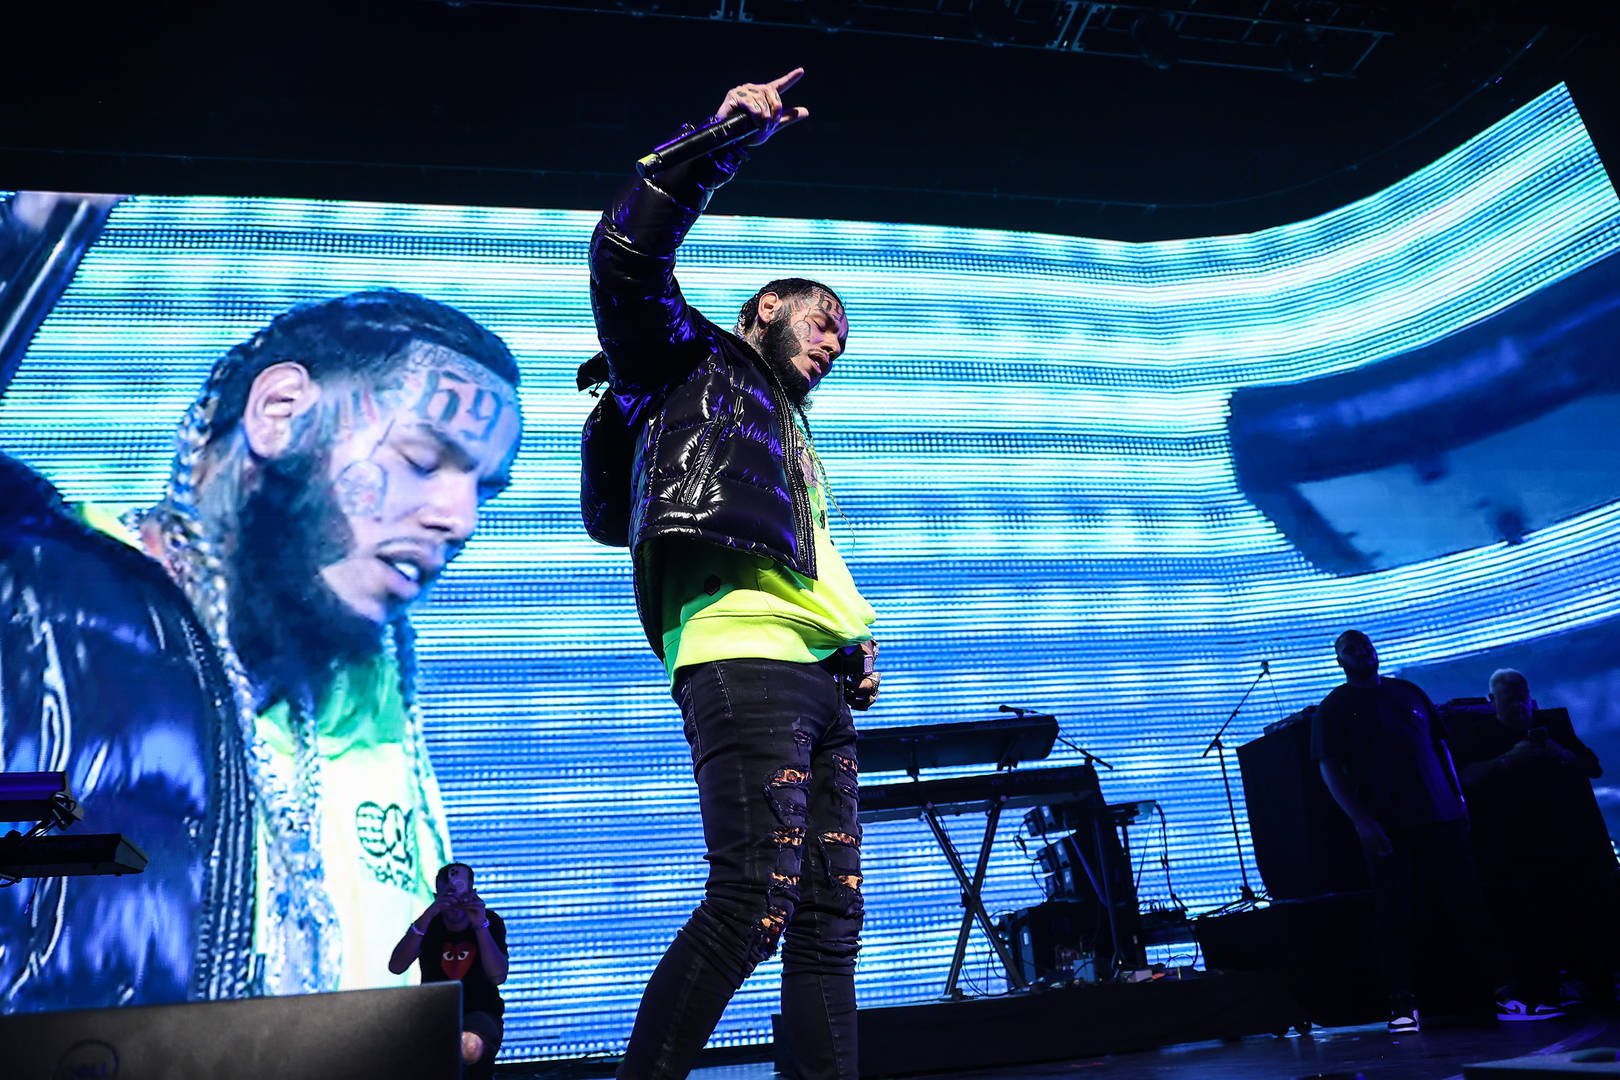 6ix9ine Performs “BEBE” To A Sold Out Crowd At Miami Bash 20